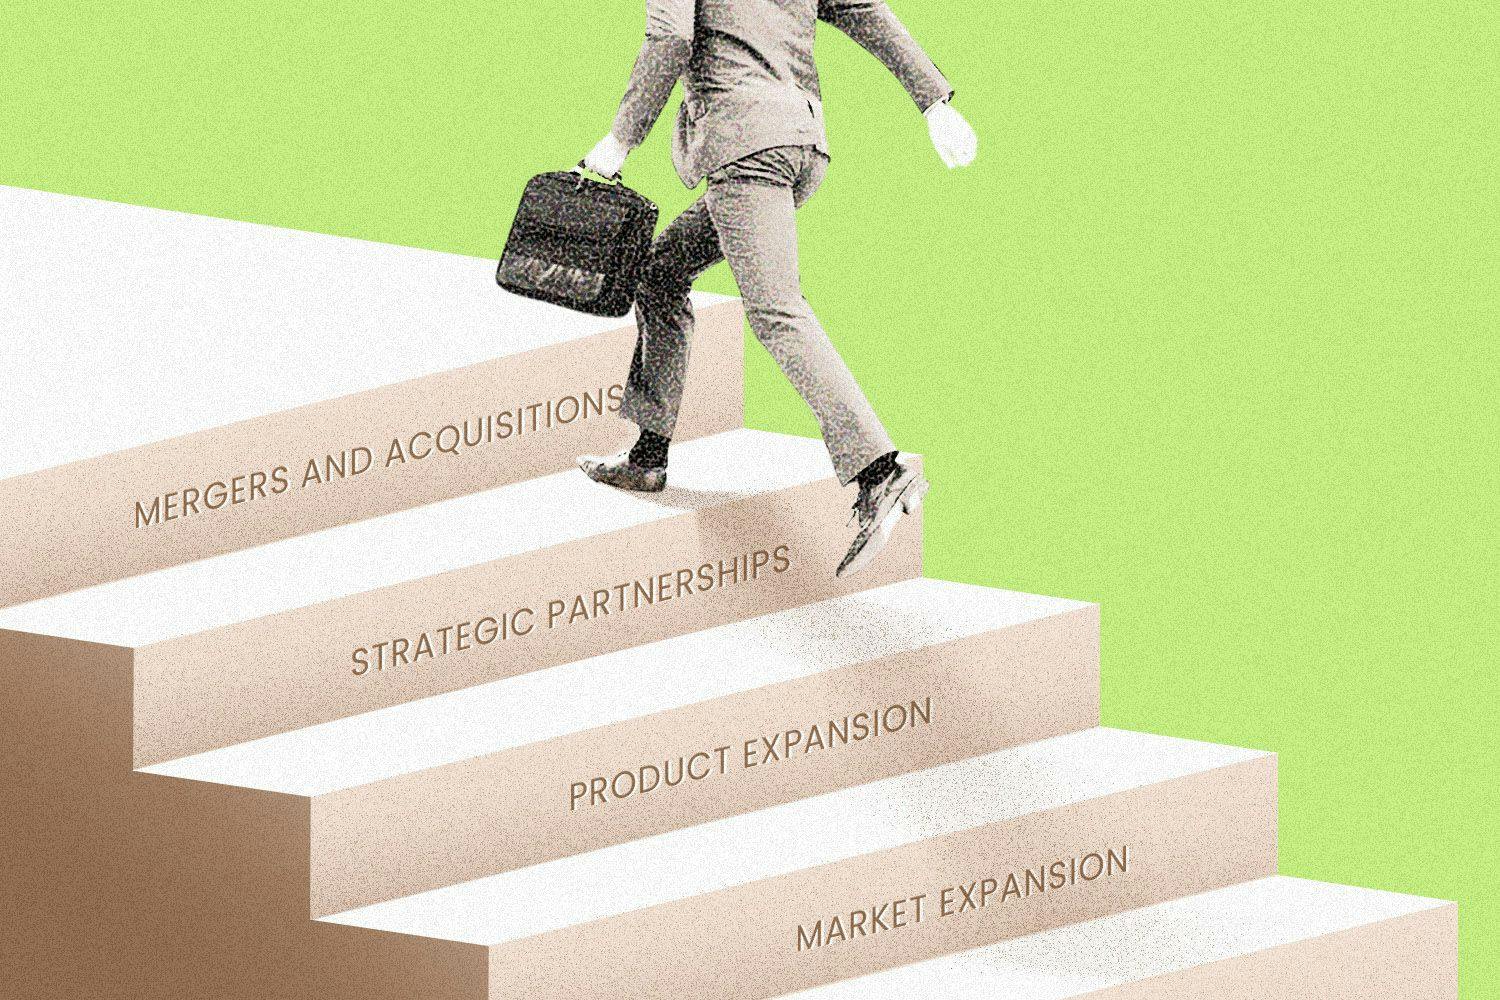 A businessman walking up steps labeled "Mergers and Acquisitions, Strategic Partnerships, Product Expansion, and Market Expansion"